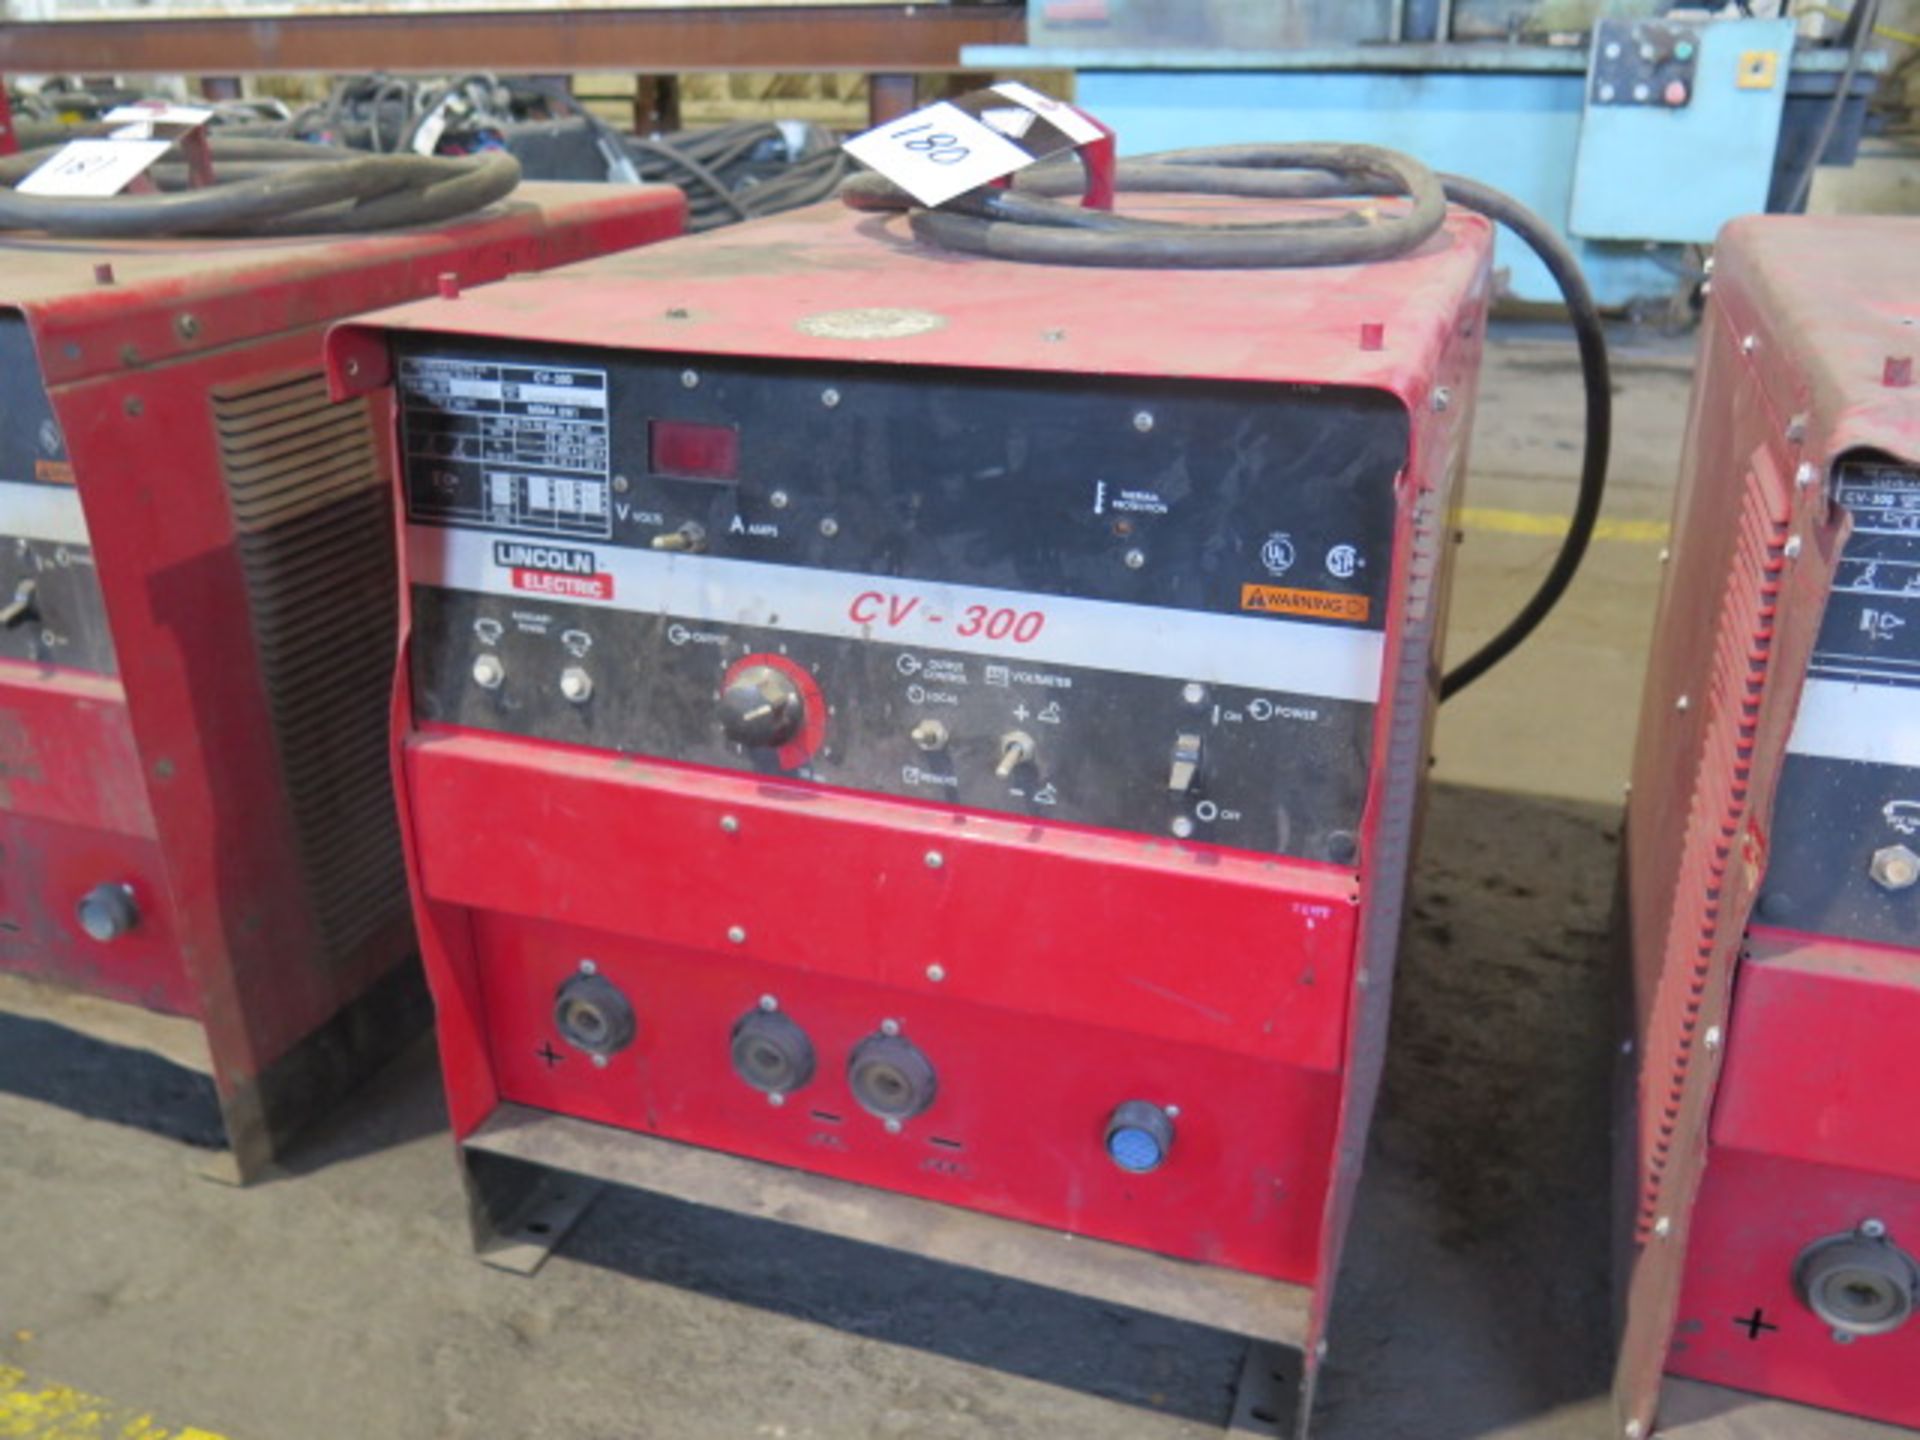 Lincoln CV-305 Arc Welding Power Source (NO CABLES) (SOLD AS-IS - NO WARRANTY)